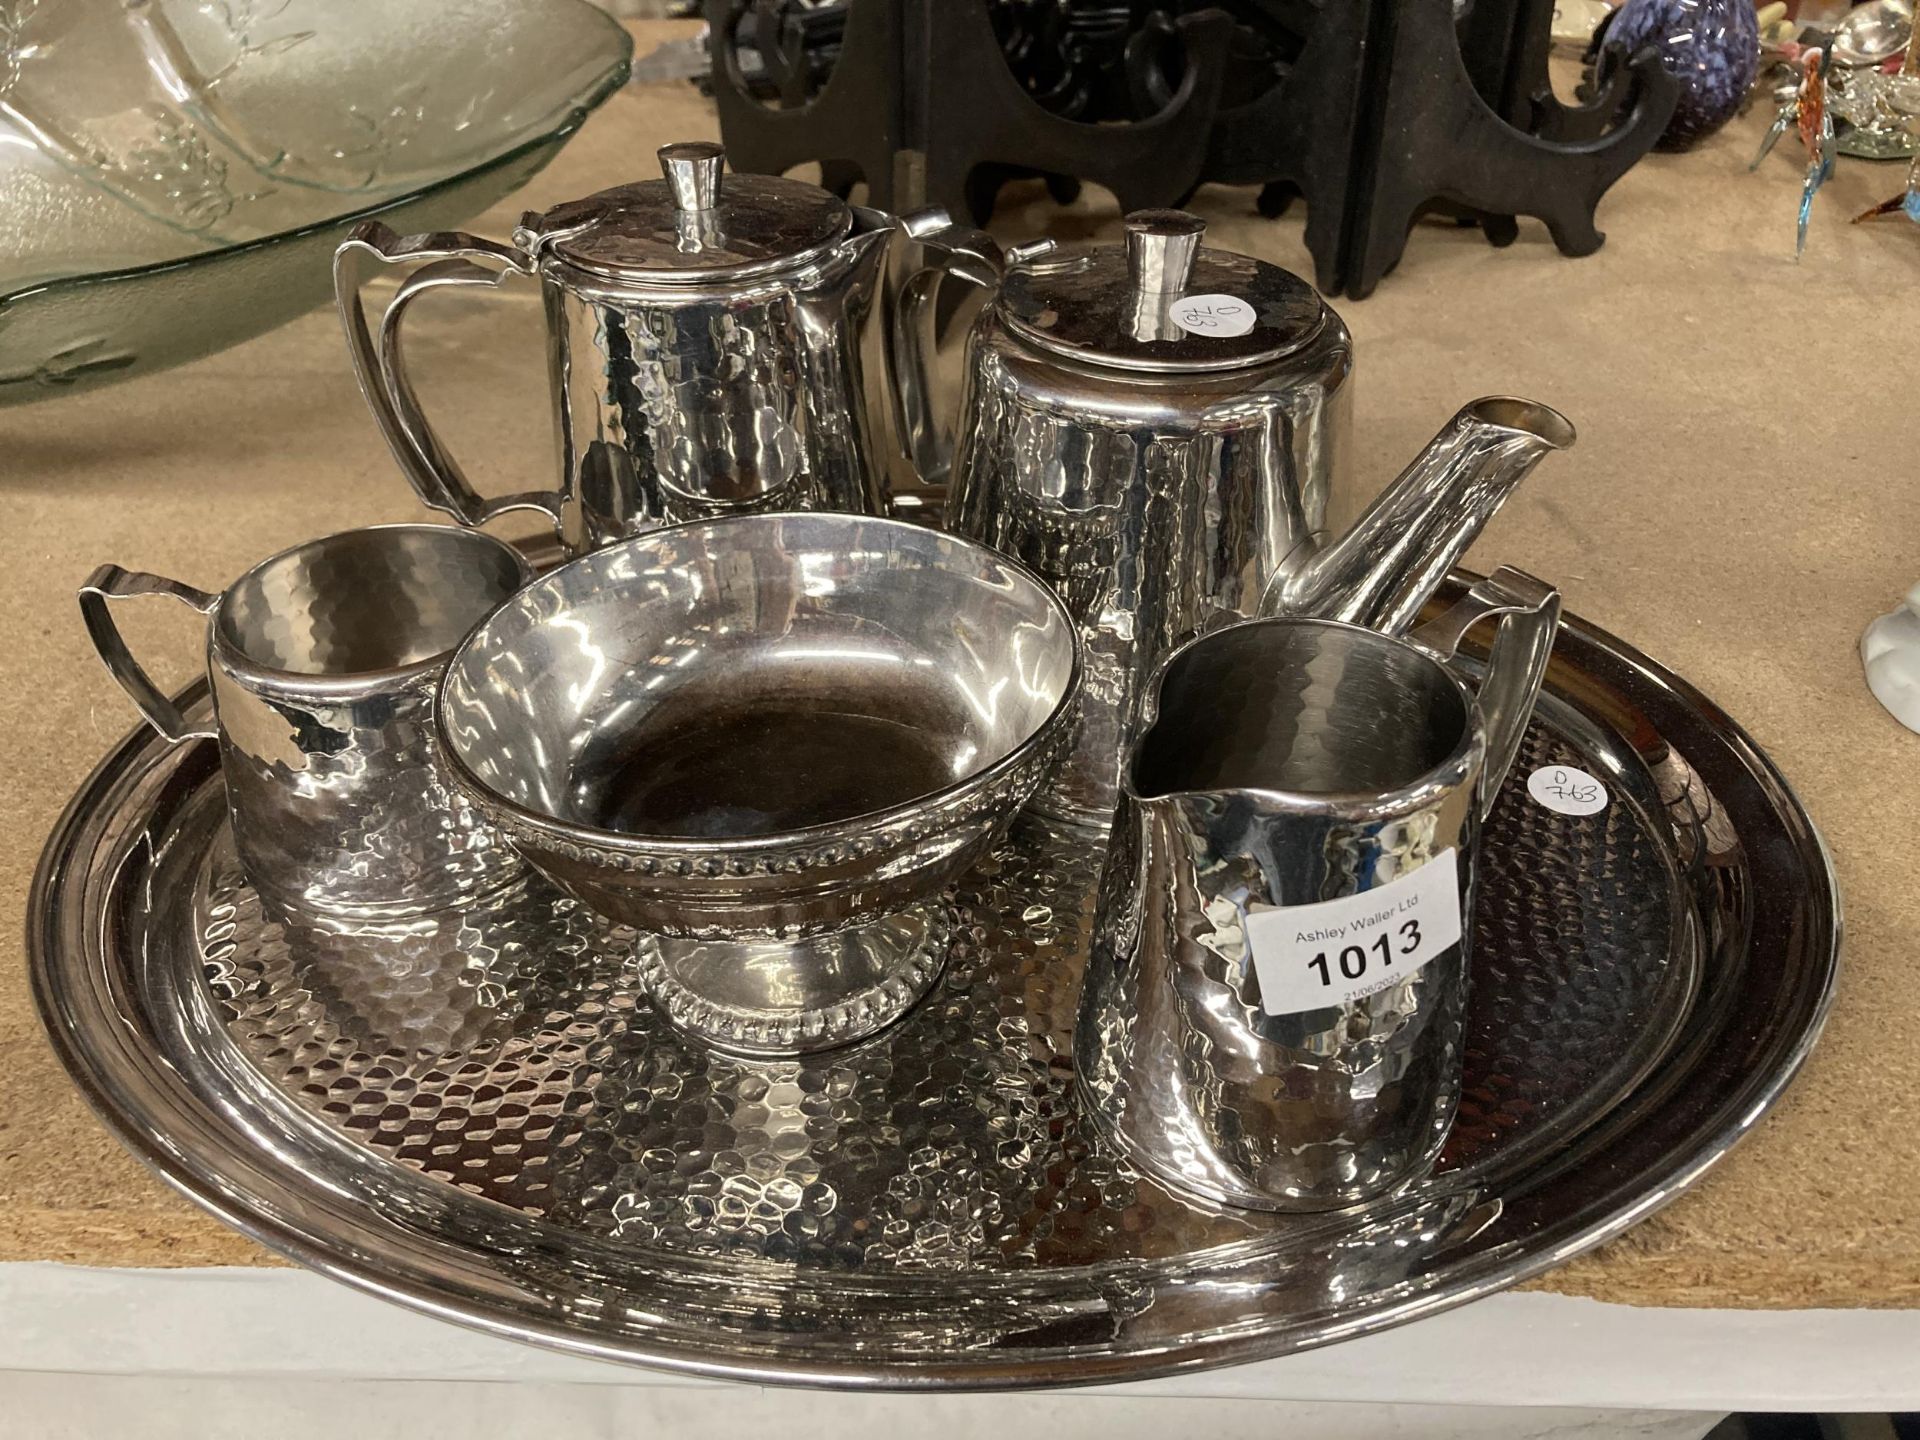 A SILVER PLATED OLD HALL TEASET TO INCLUDE A TRAY, TEAPOT, HOT WATER JUG, CREAM JUG AND SUGAR BOWLS